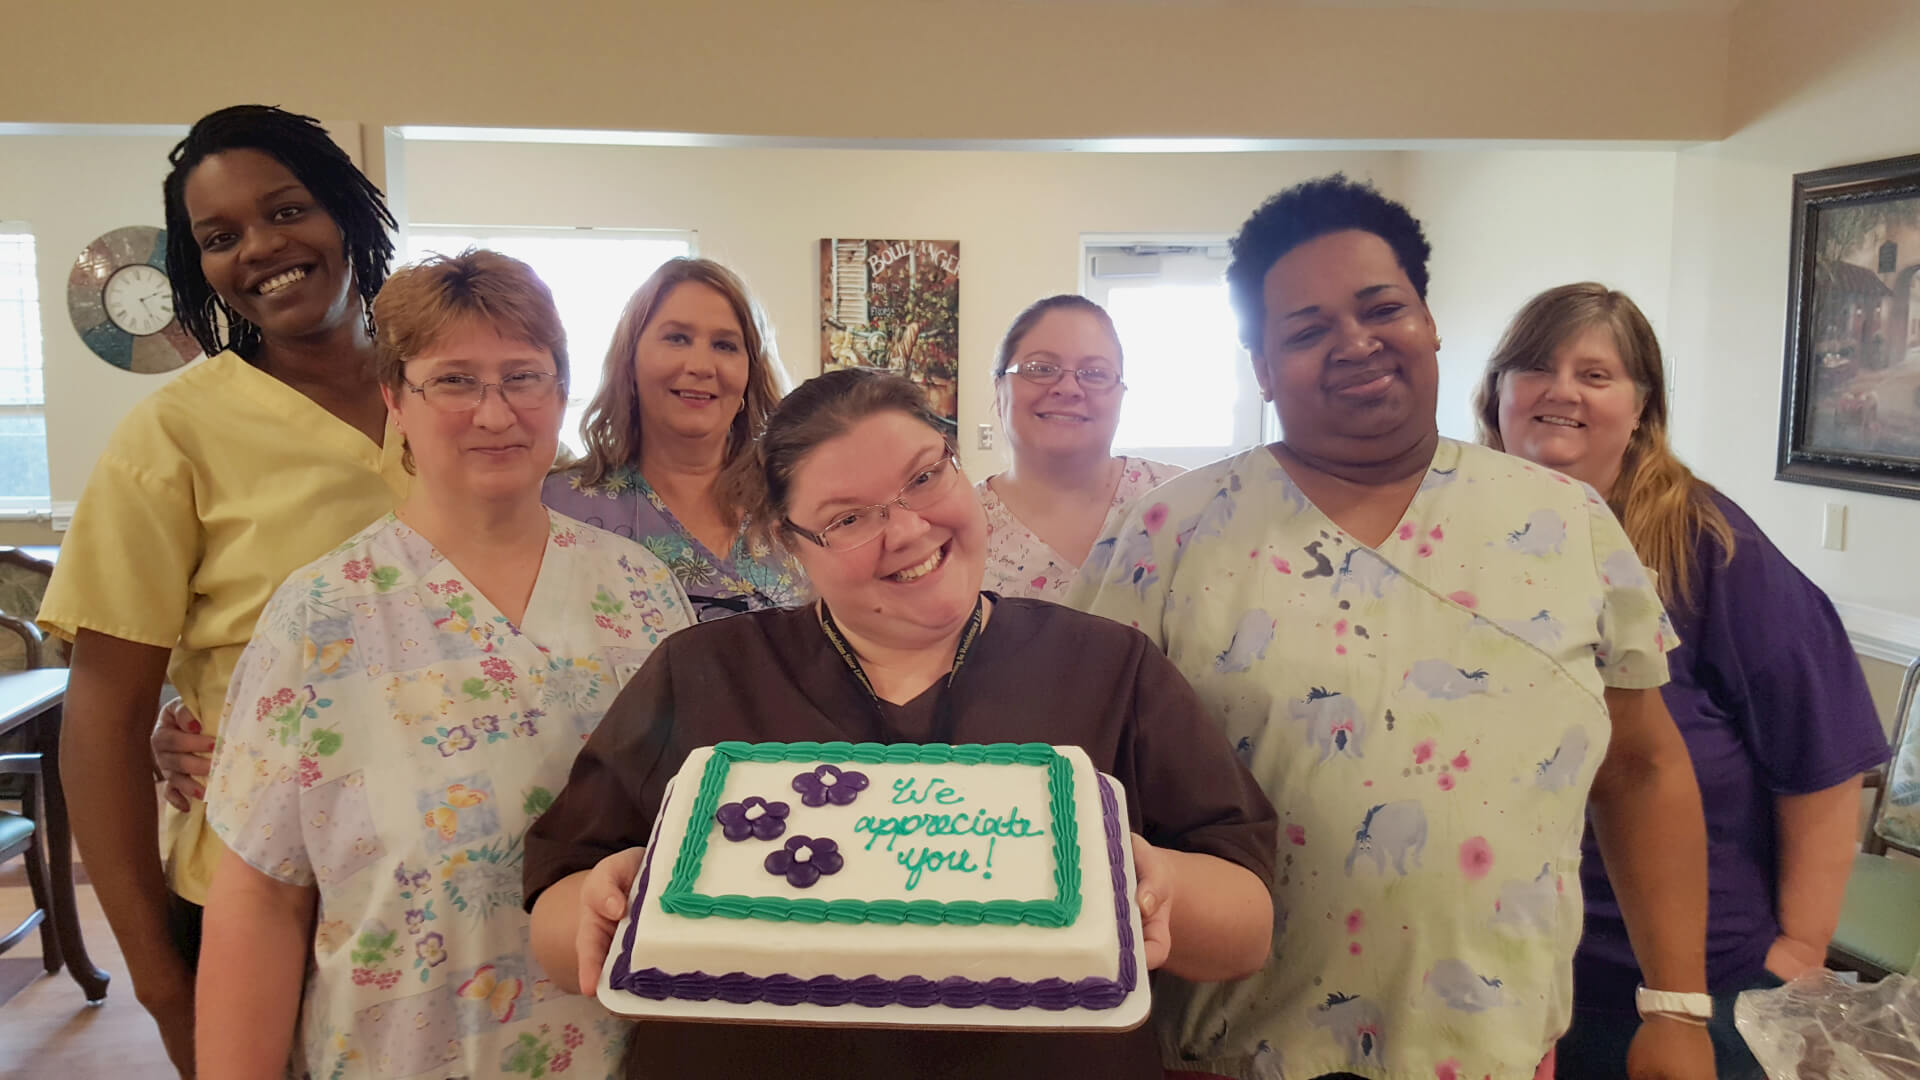 Hickory Village employees holding the cake given to them by residents in honor of Employee Appreciation day